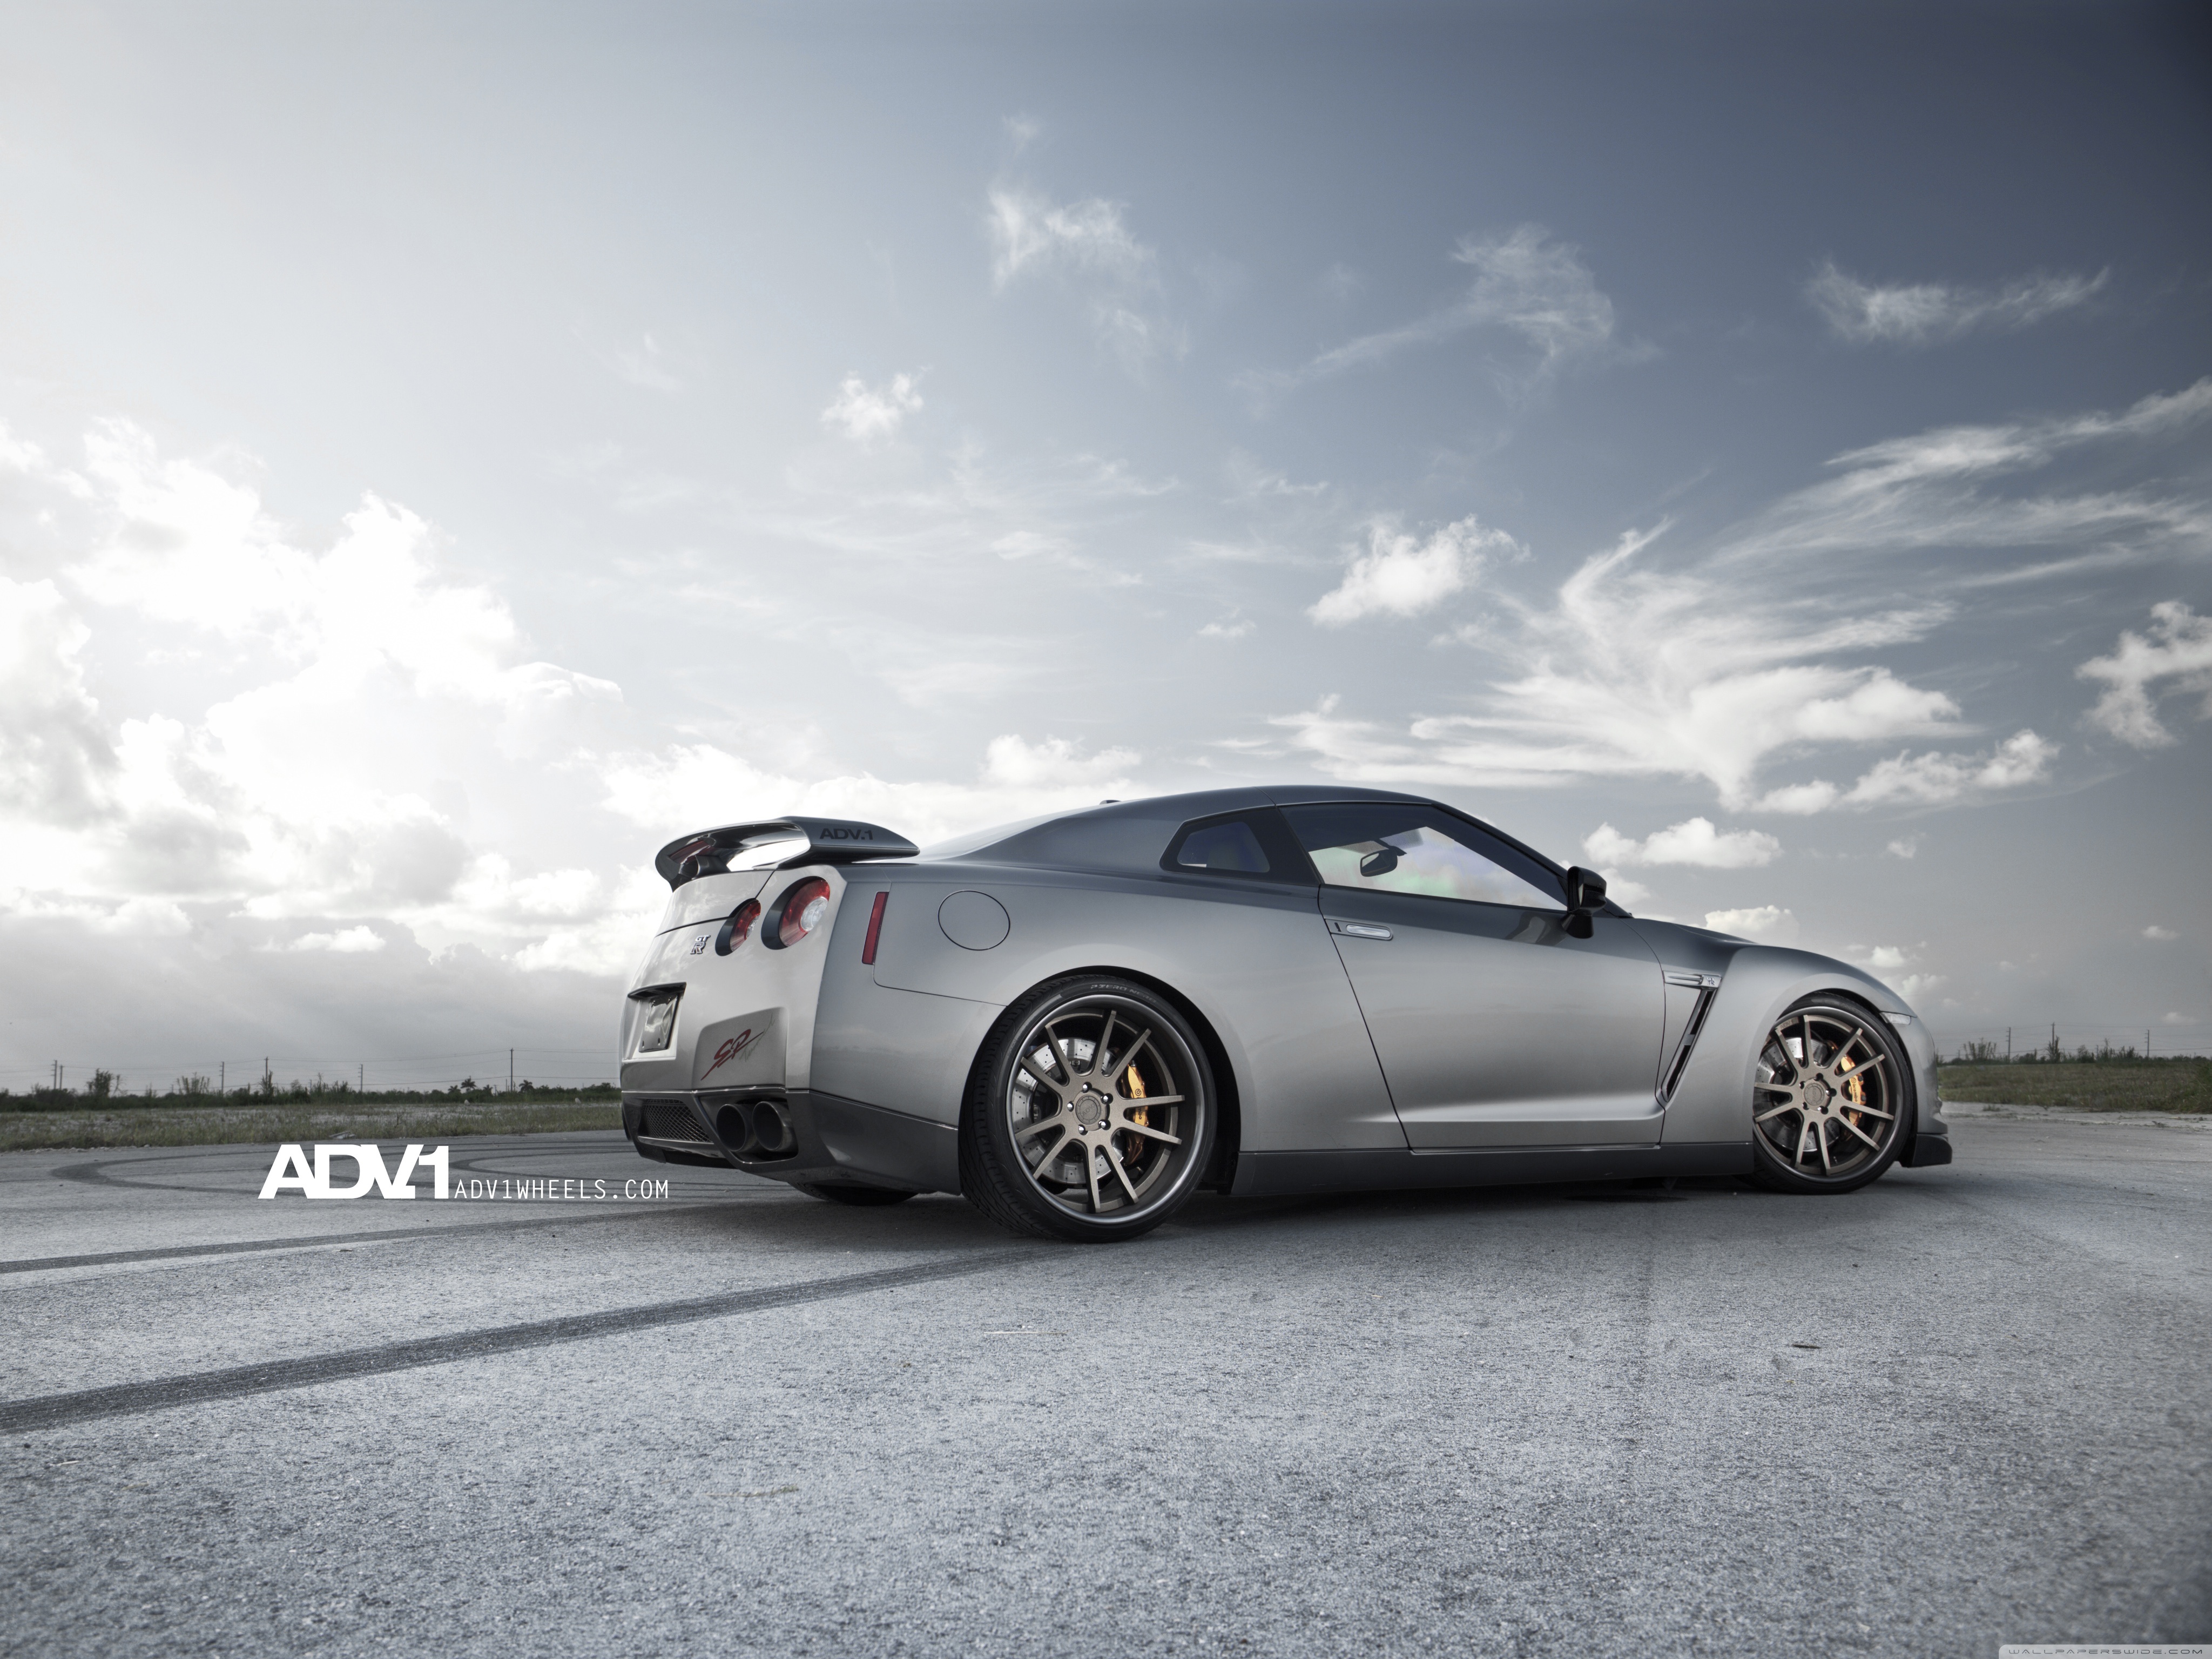 Amazing Nissan ADV 1 GTR Pictures & Backgrounds